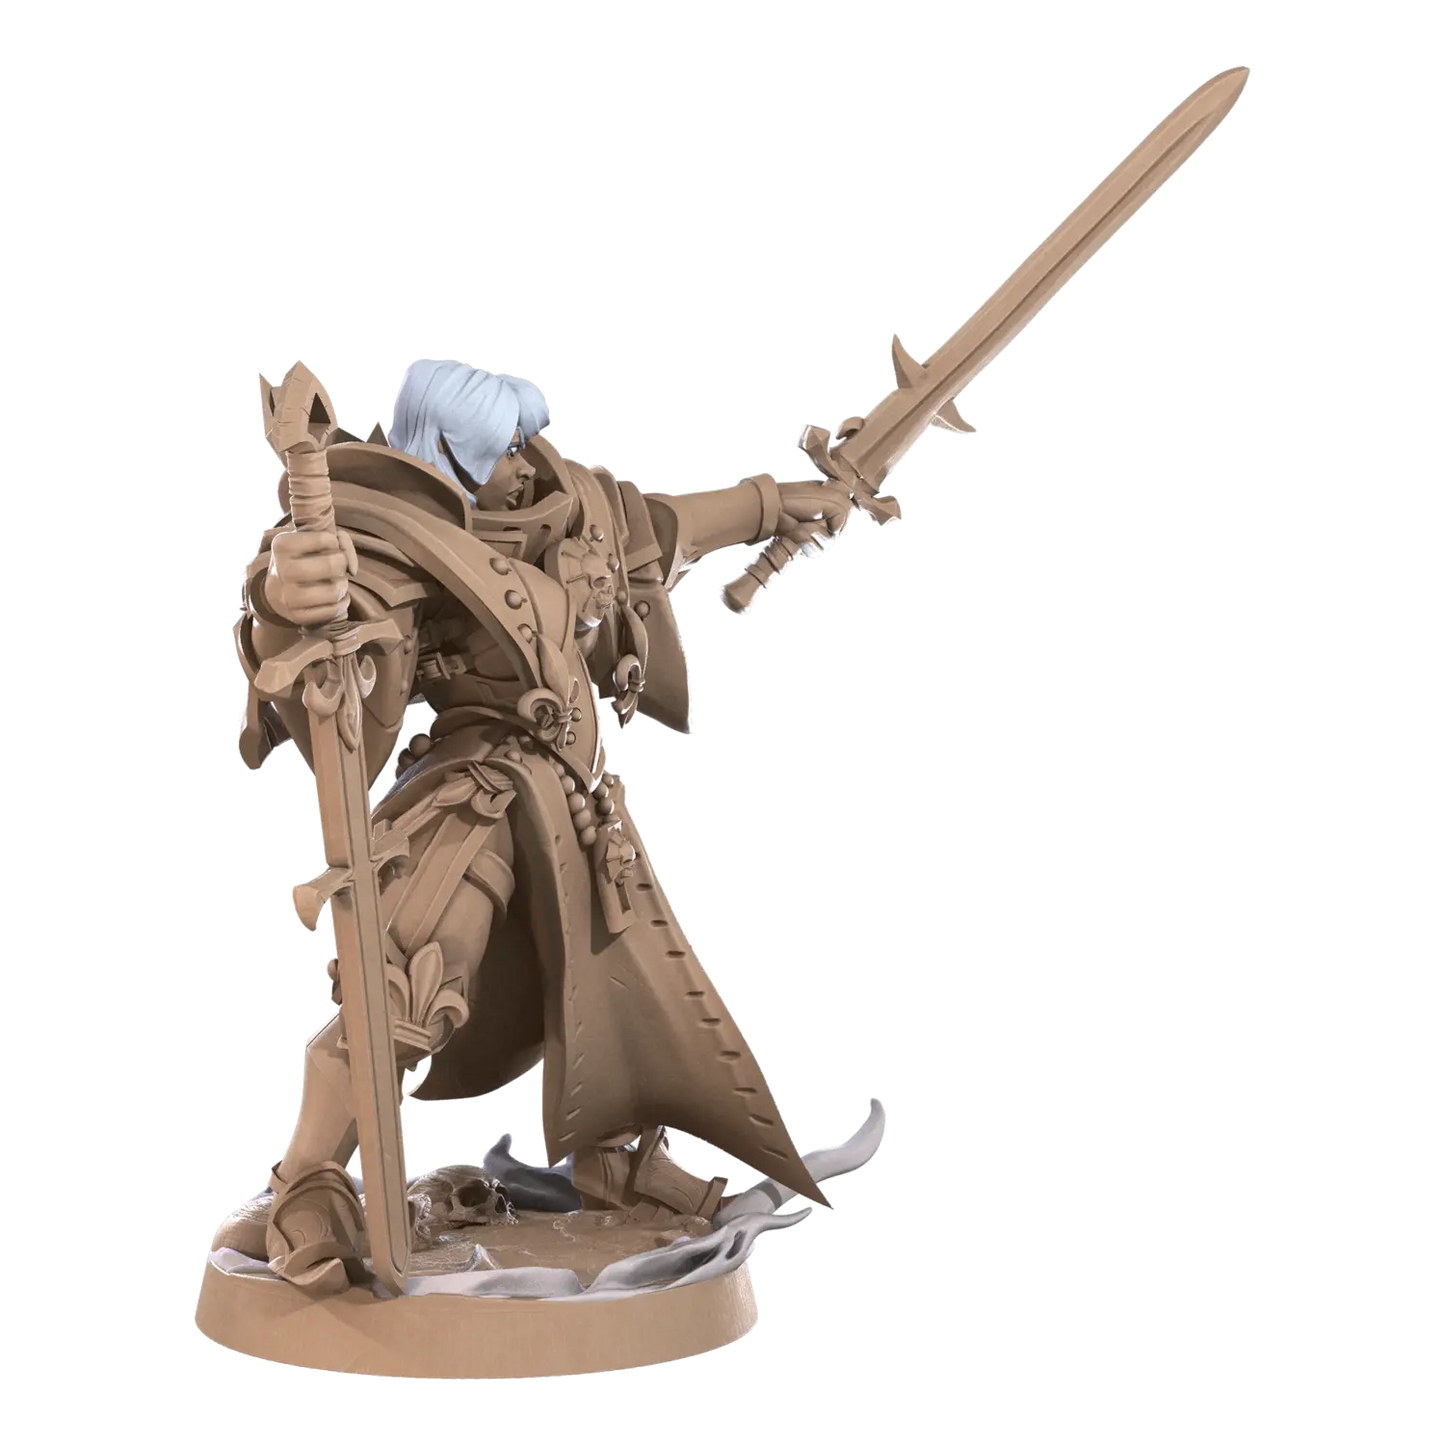 DnD Battle Sisters - Fighter - Human - Miniature - Paladin Elara 01 Battle Sisters - Fighter - Human - Miniature - Paladin sold by DoubleHitShop